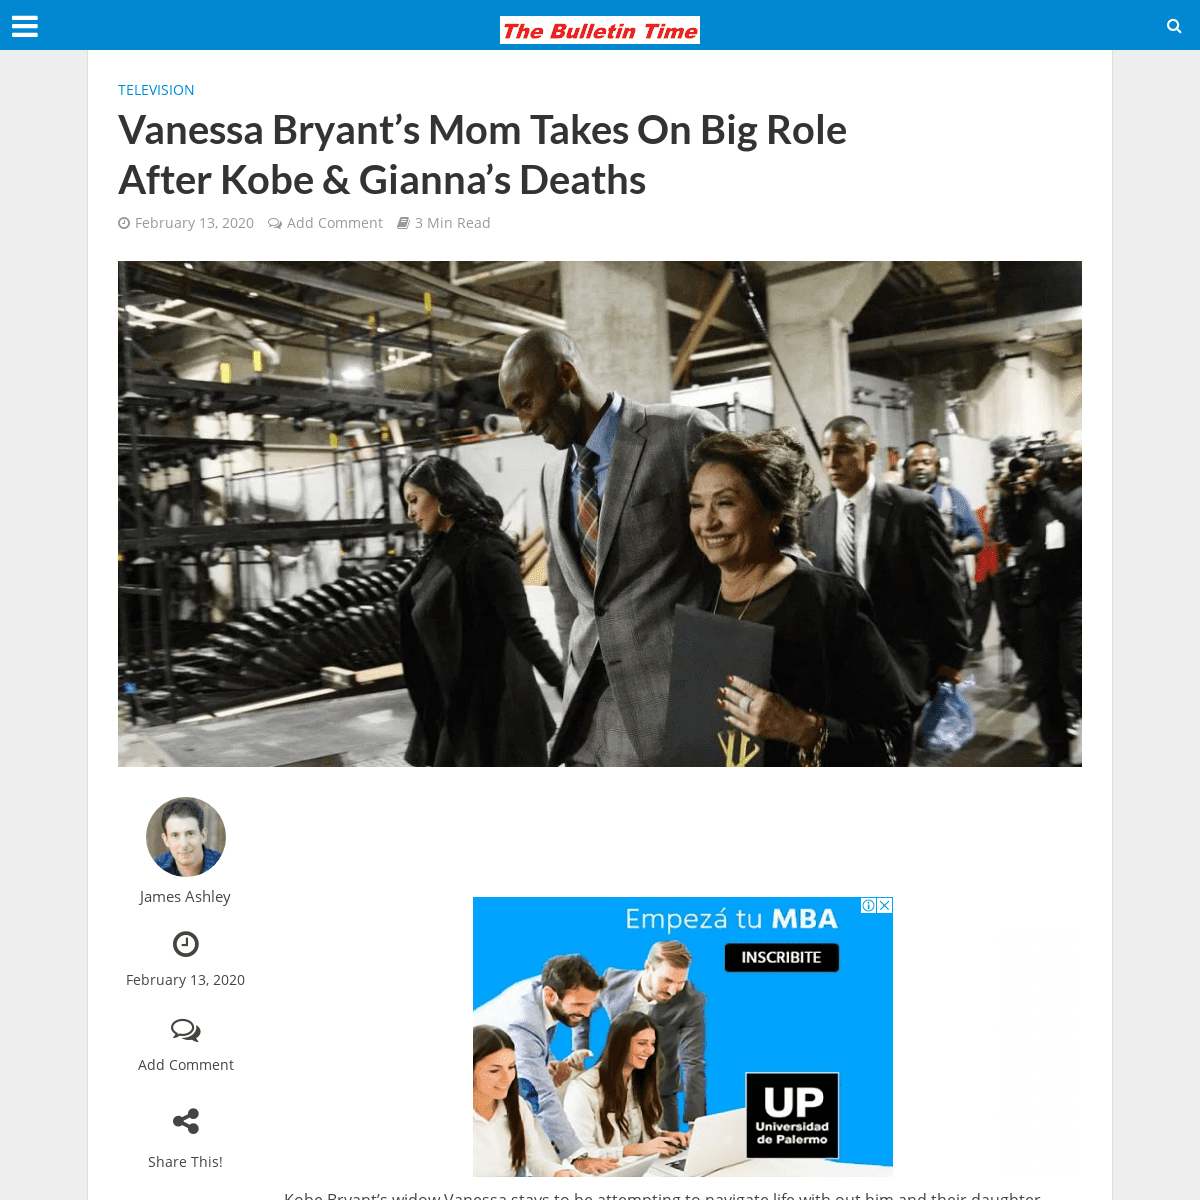 A complete backup of www.thebulletintime.com/television/vanessa-bryants-mom-takes-on-big-role-after-kobe-giannas-deaths/